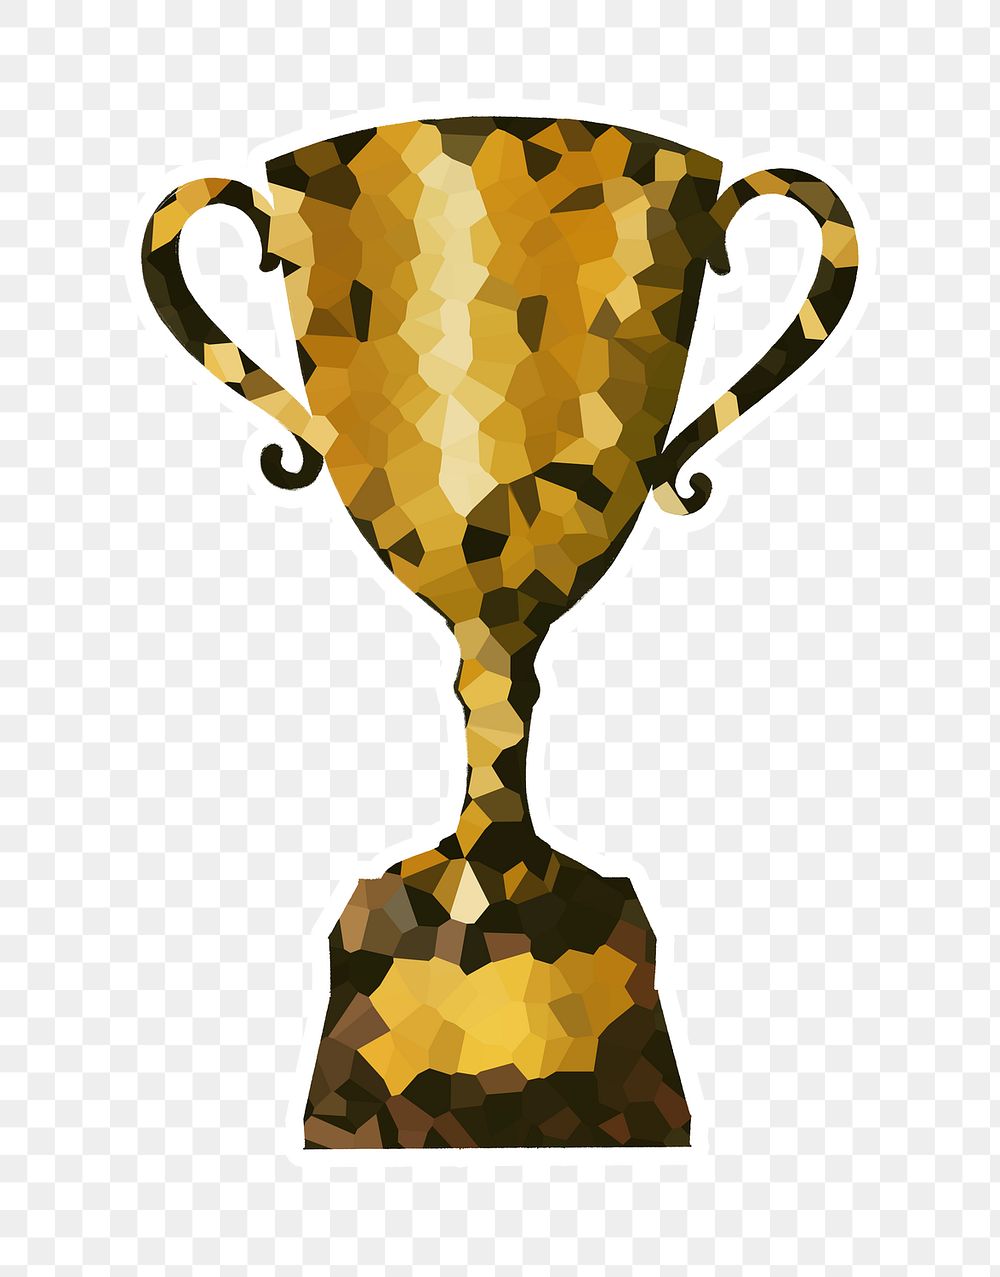 Crystallized style trophy illustration with a white border sticker